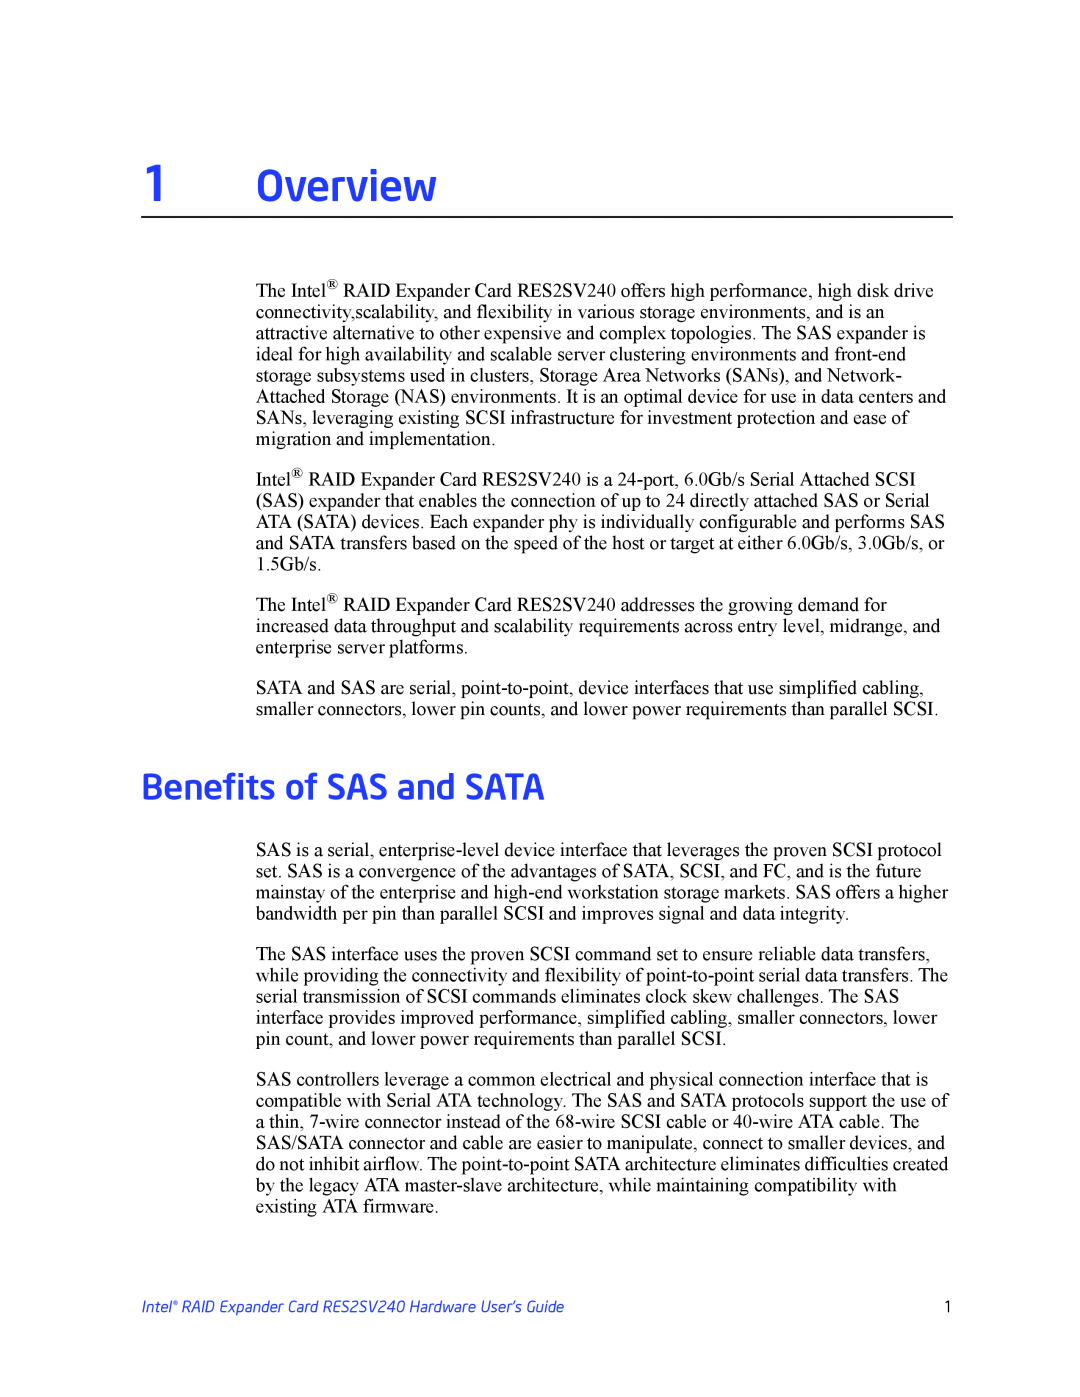 Intel RES2SV240 manual 1Overview, Benefits of SAS and SATA 